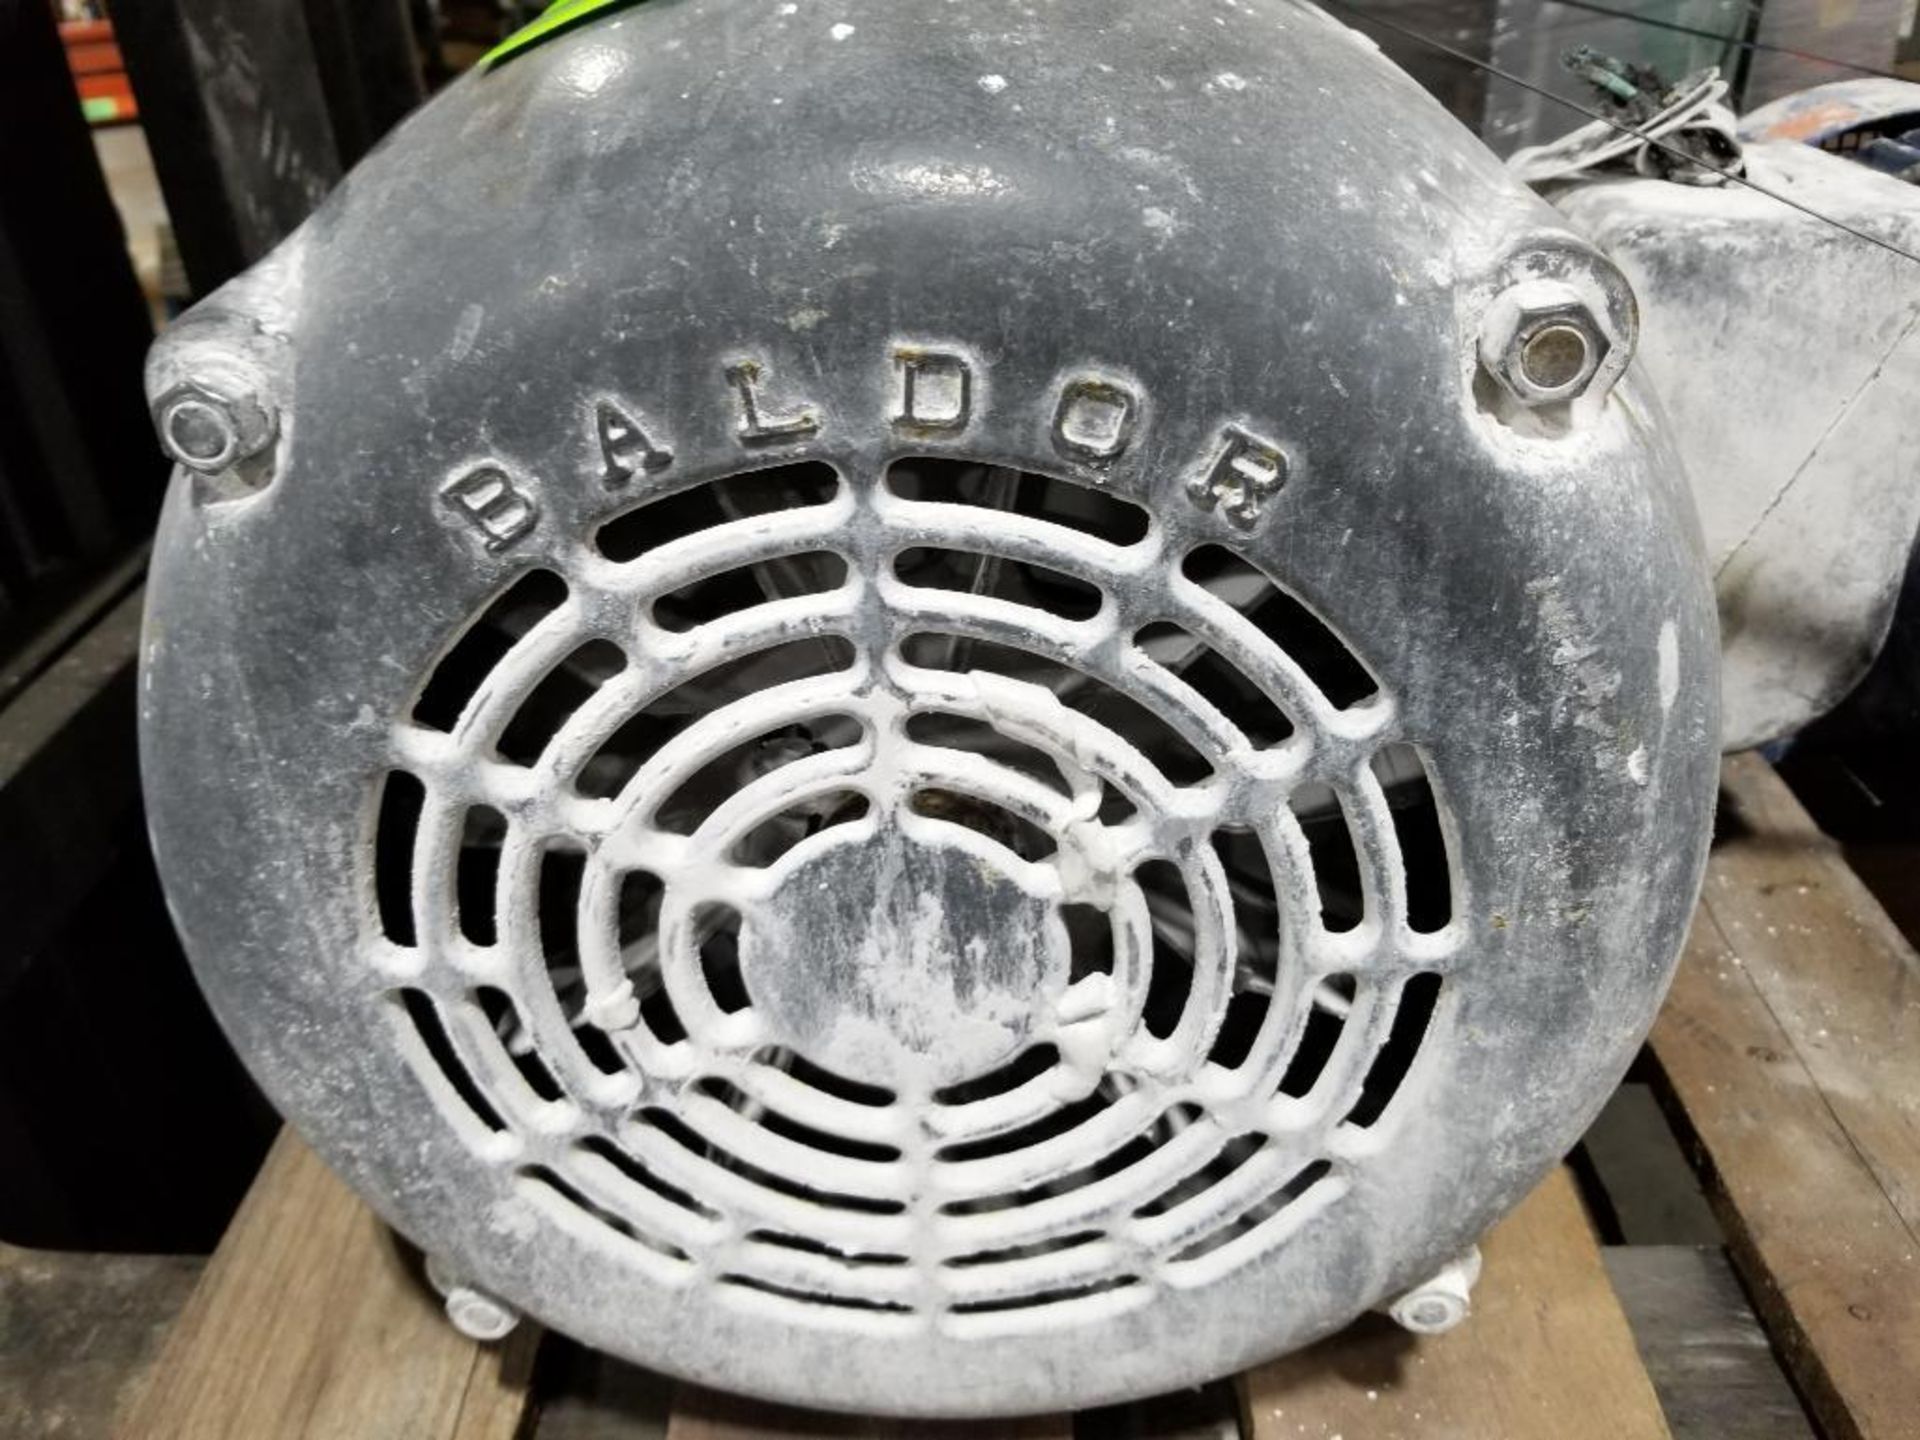 Baldor motor. 230/460v 3-phase. Appears to be 40-50hp but tag is unreadable. - Image 8 of 8